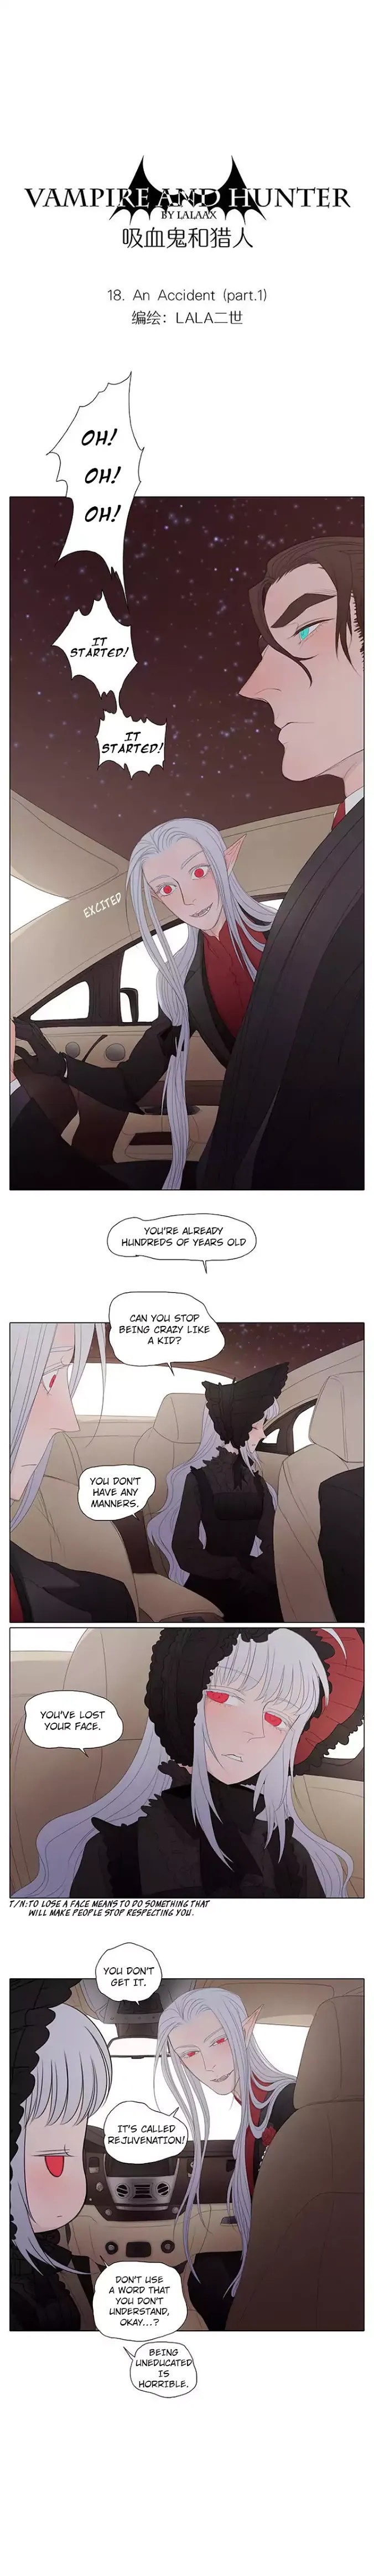 Vampire And Hunter Chapter 18: An Accident - Picture 3